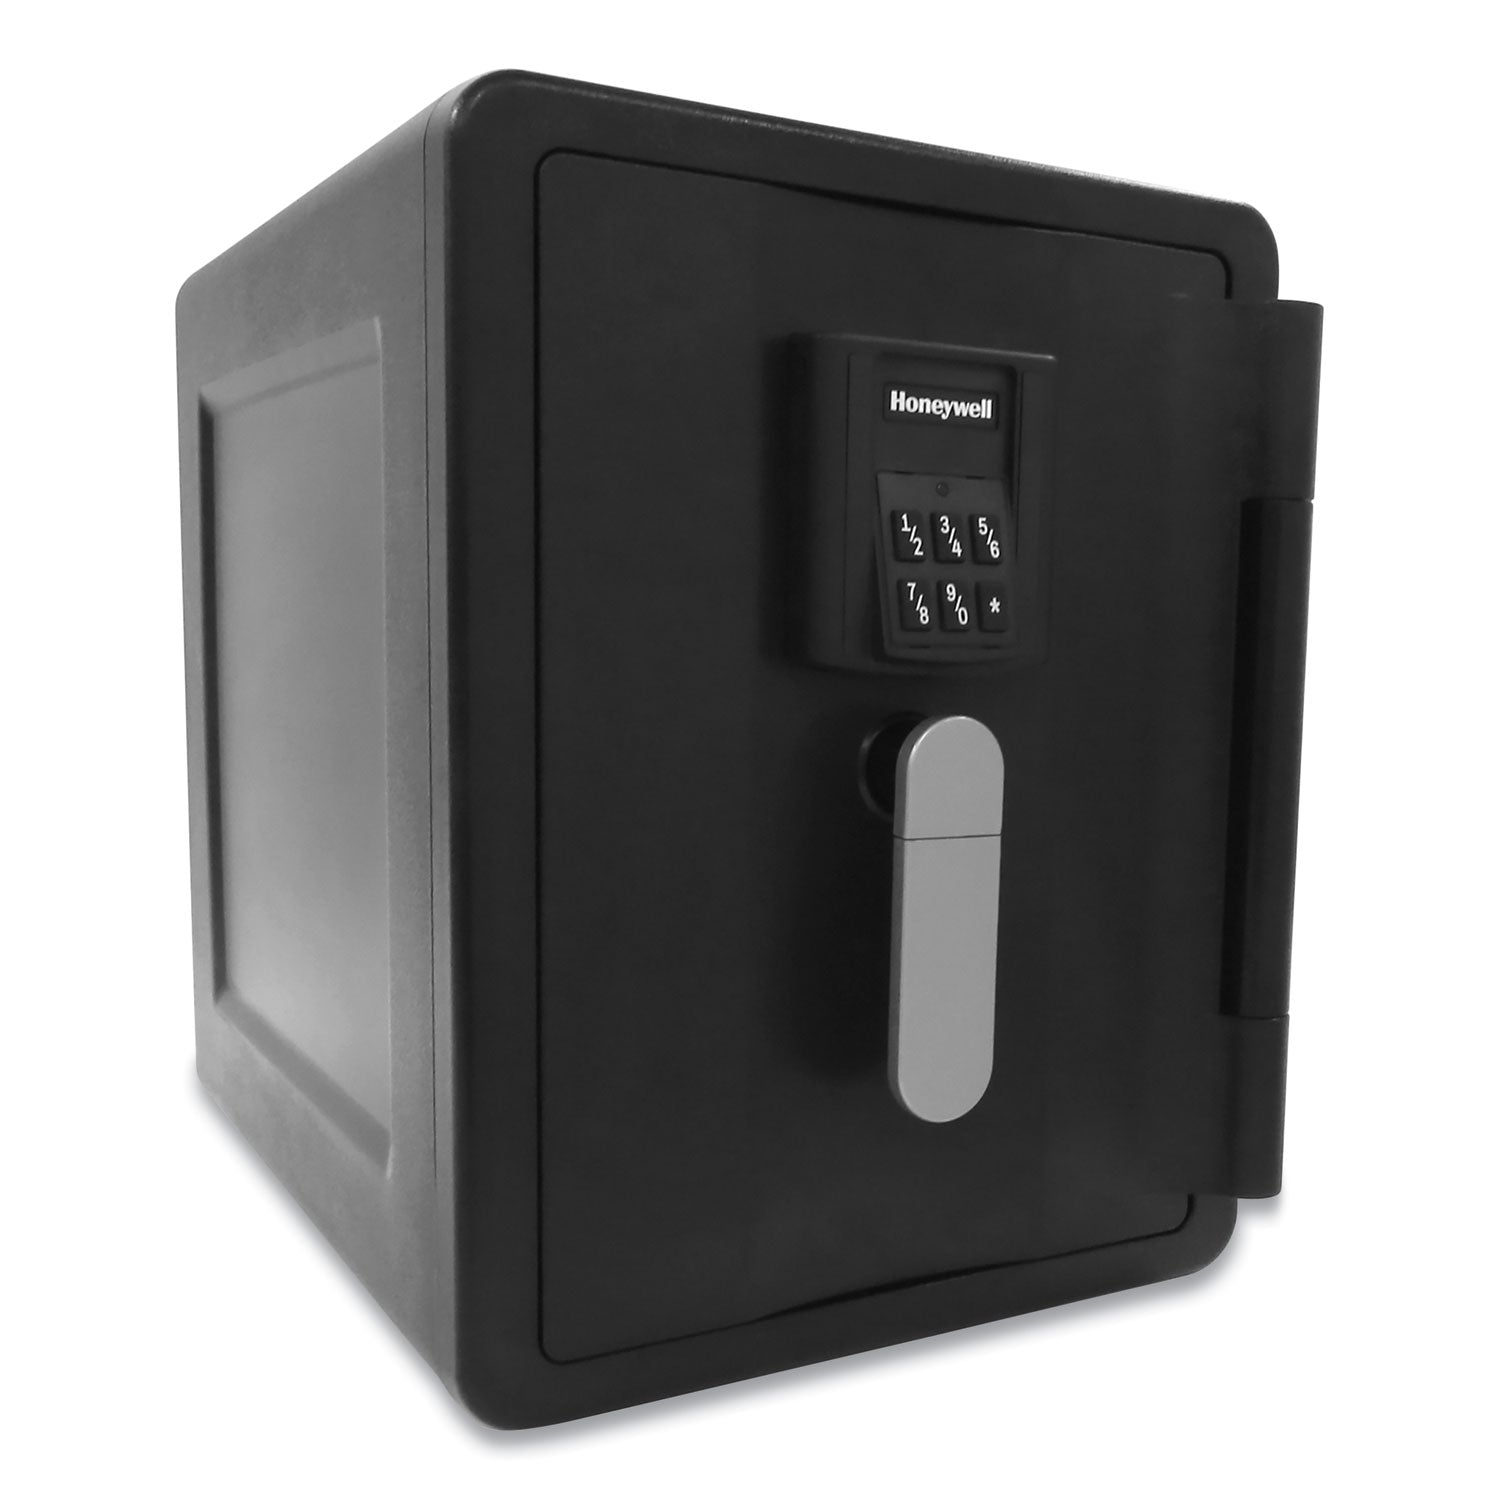 fire-and-waterproof-safe-with-digital-lock-118-x-167-x-156-07-cu-ft-black_hwl2901 - 1